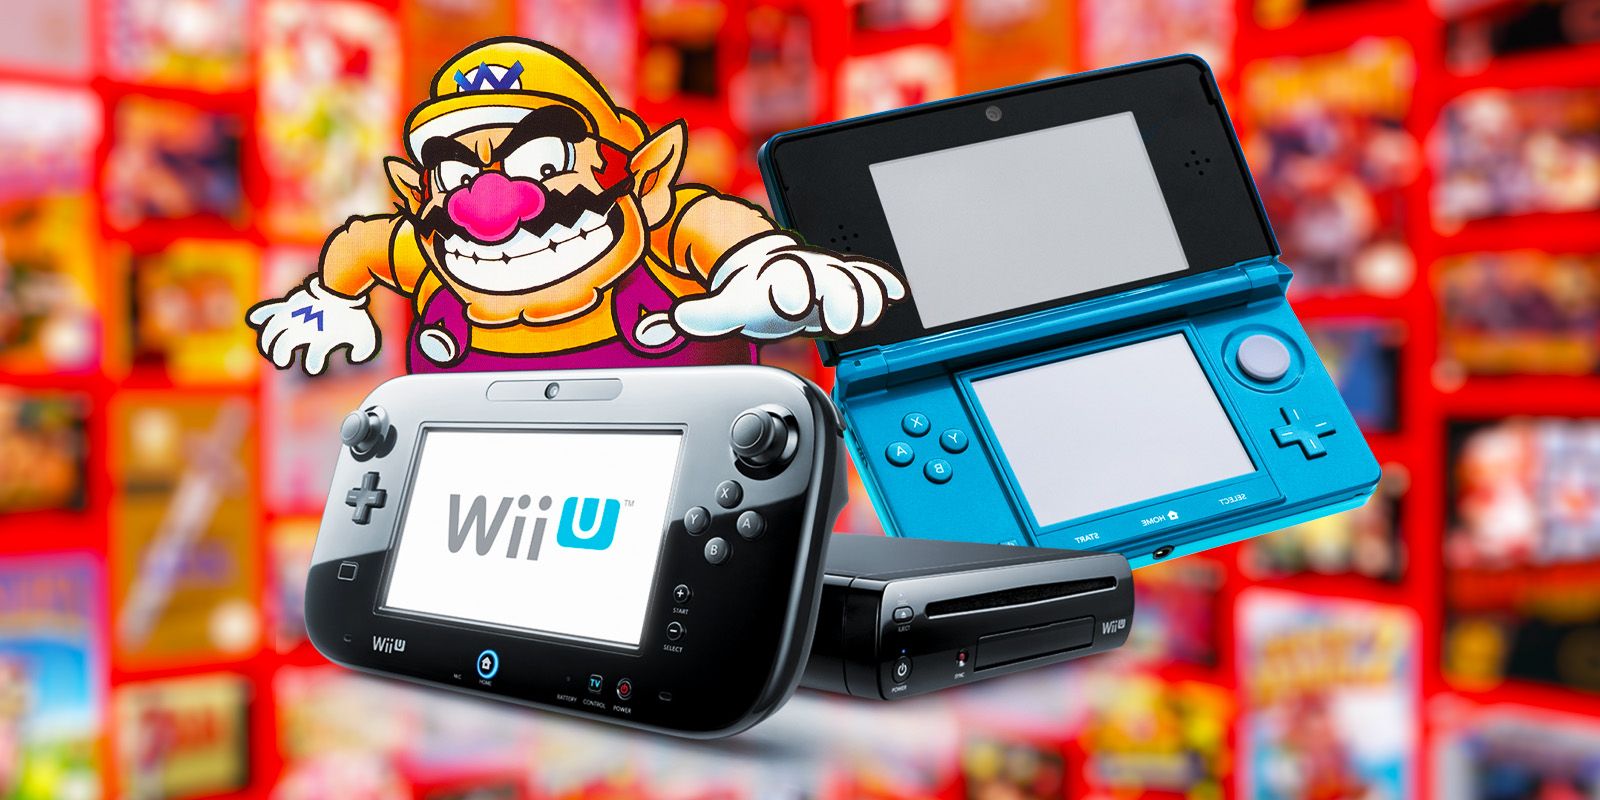 An image of Wario alongside the Nintendo 3DS and Wii U consoles.